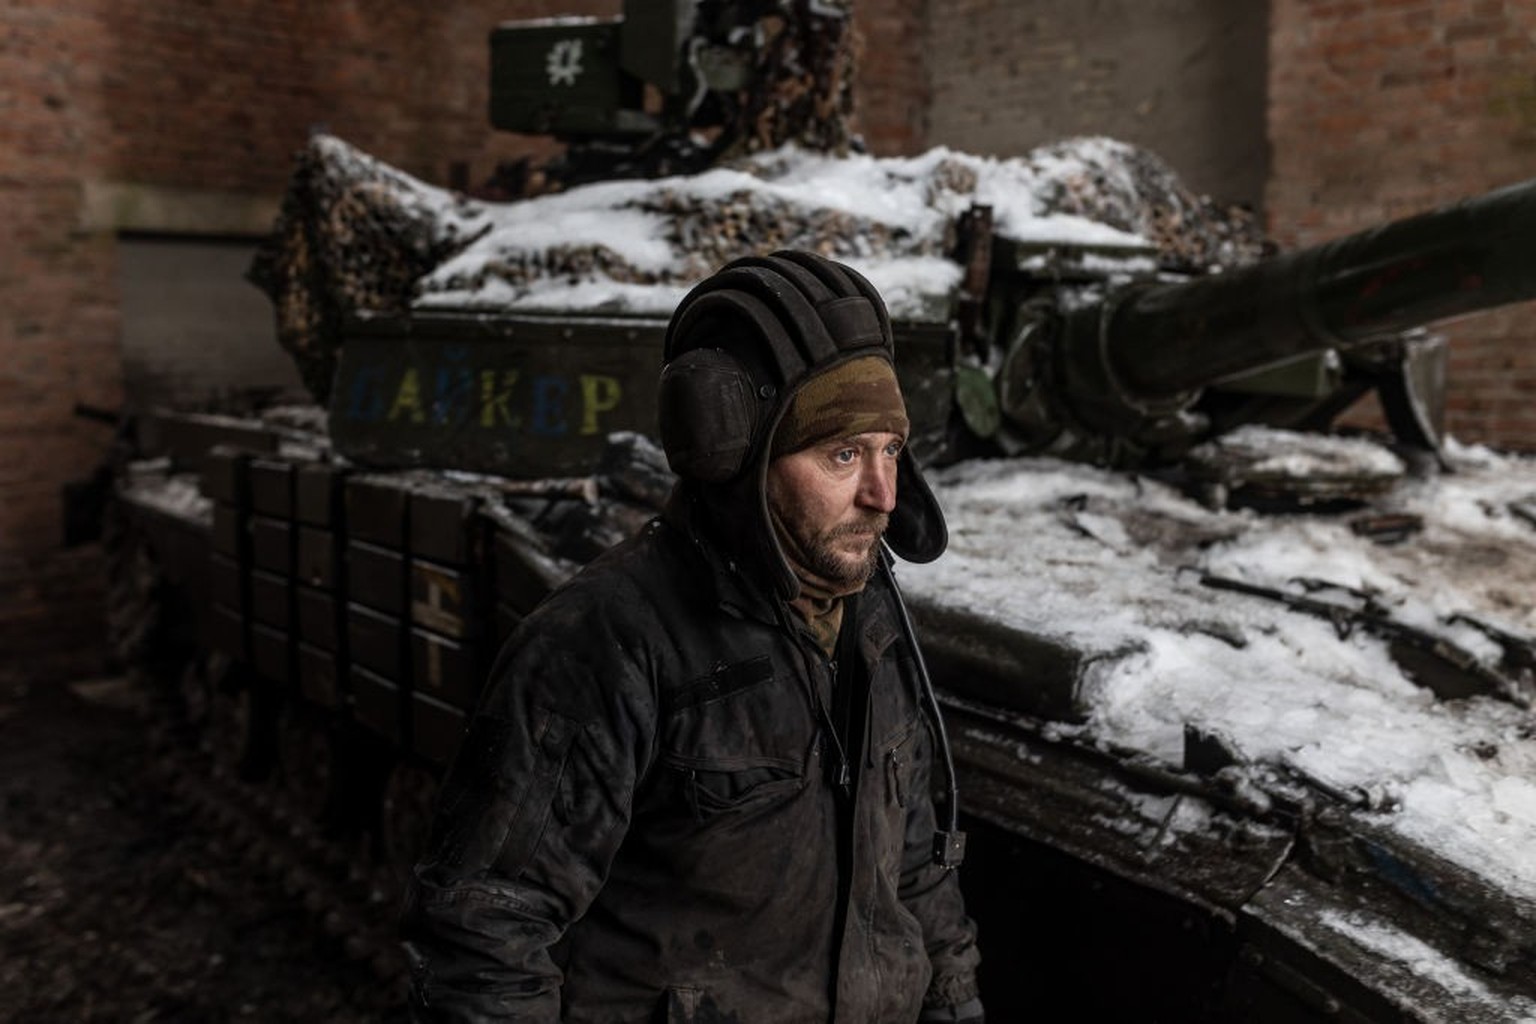 DONETSK OBLAST, UKRAINE - FEBRUARY 11: A Ukrainian soldier next to a tank in the direction of Bakhmut, where clashes between Russia and Ukraine continue to take place, in Donetsk Oblast, Ukraine on Fe ...